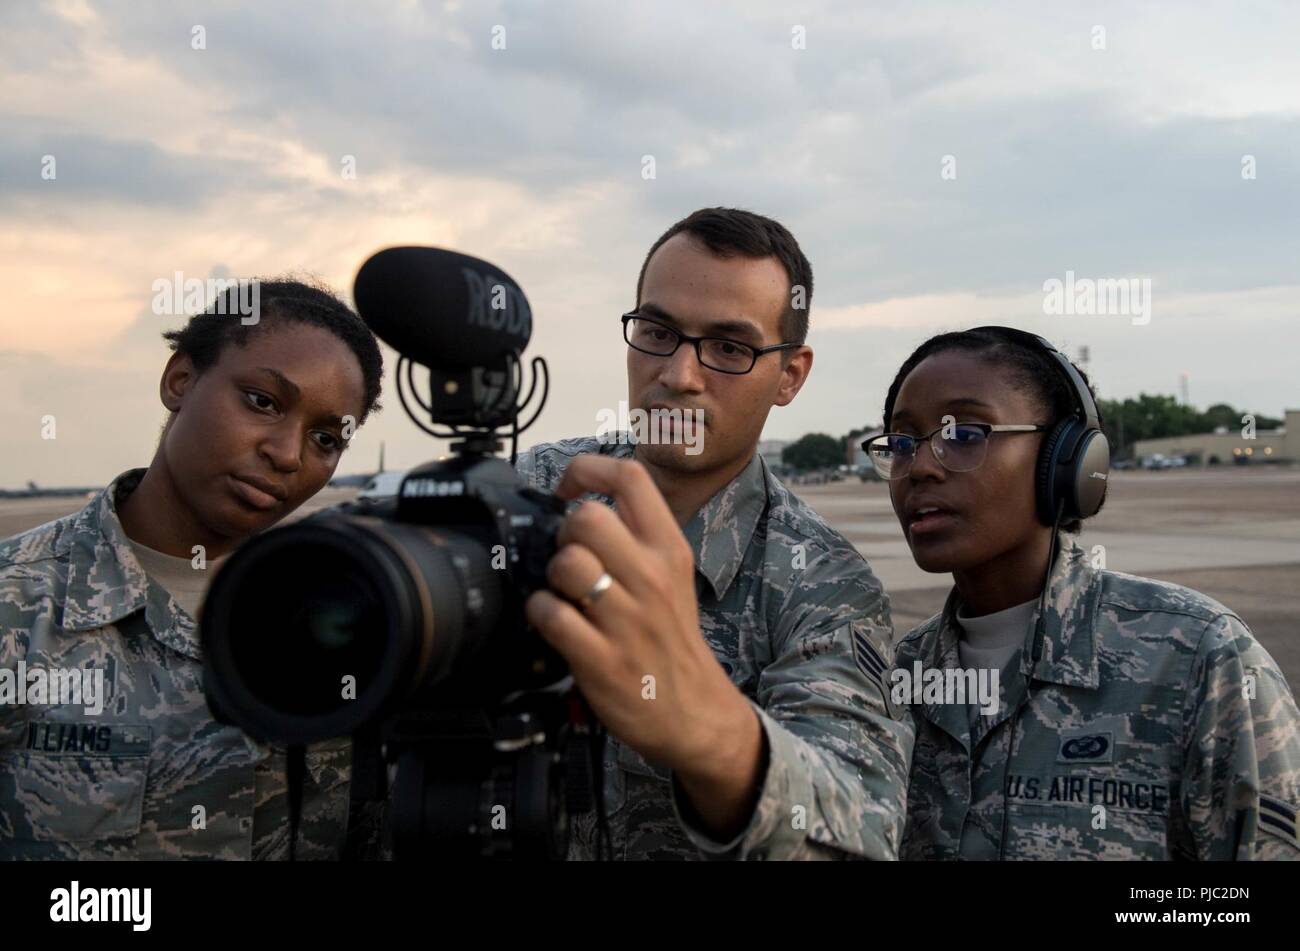 Airmen from the 2nd Bomb Wing Public Affairs discuss camera settings on the flight line at Barksdale Air Force Base, La., July 12, 2018. These public affairs specialists documented the return of Airmen from a Continuous Bomber Presence supporting the Indo-Pacific Command. Stock Photo